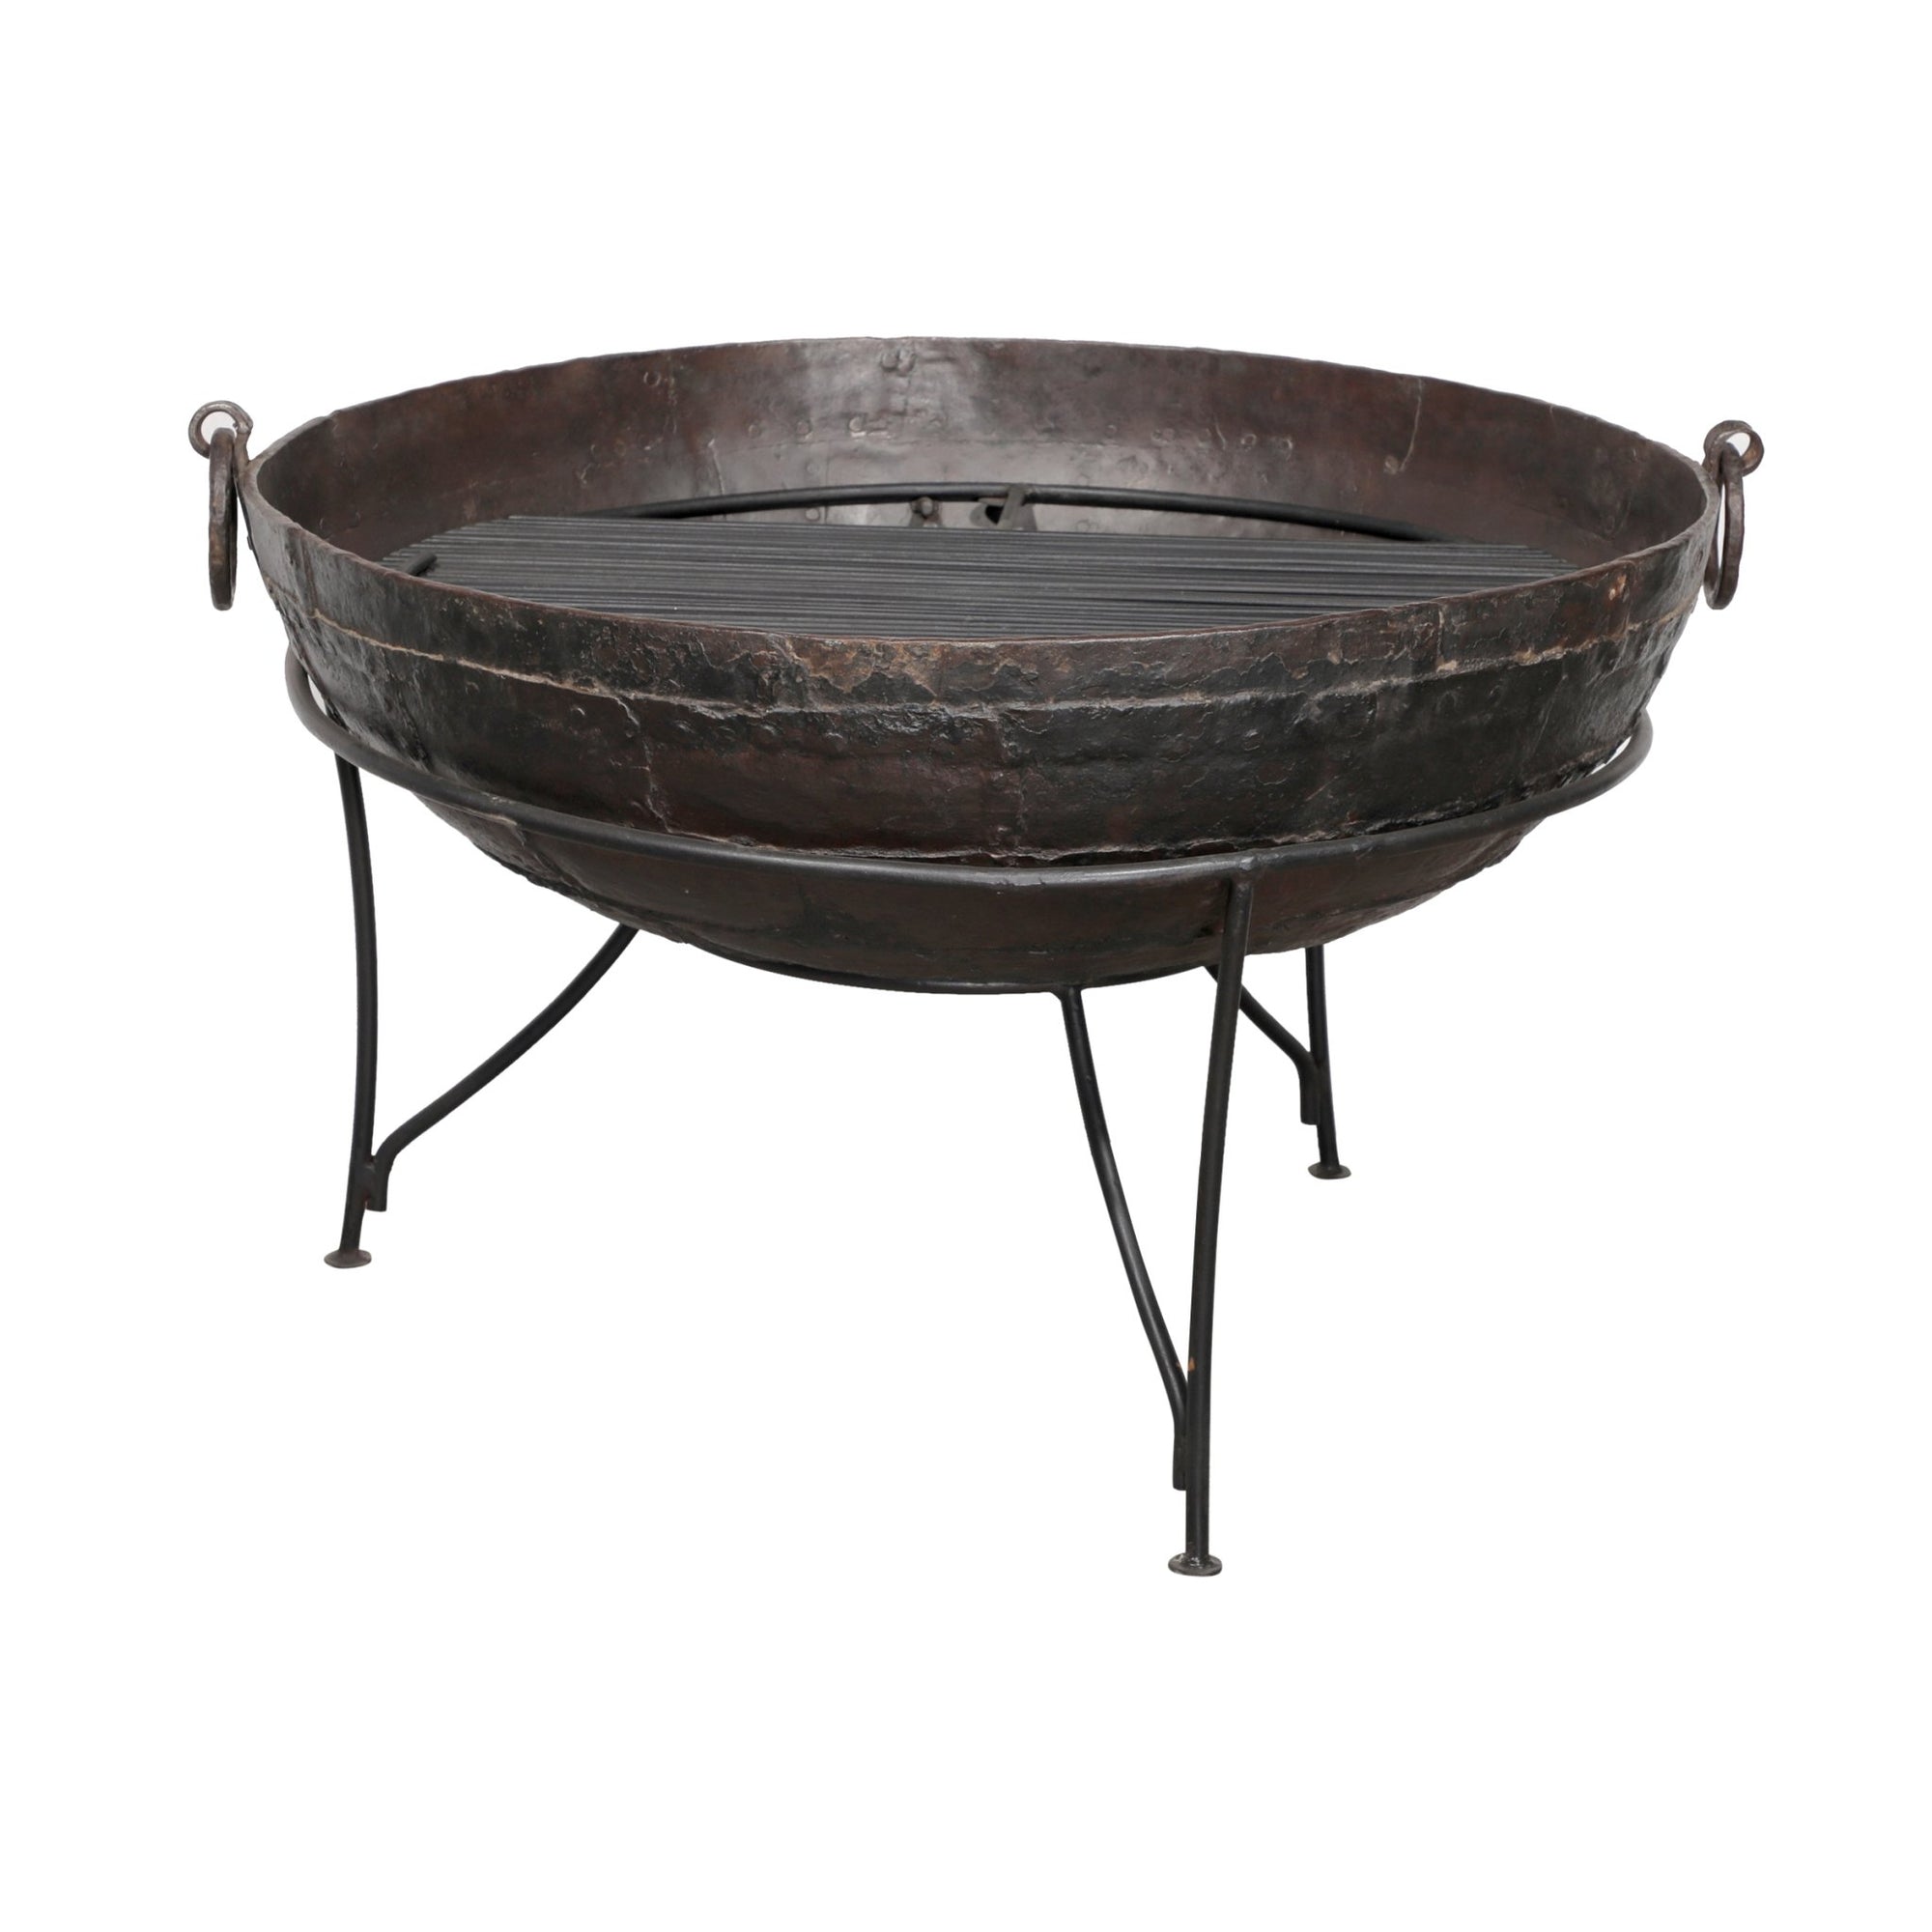 Old 'Kadai' Indian Fire Bowl & Stand From Rajasthan - Ca 1900